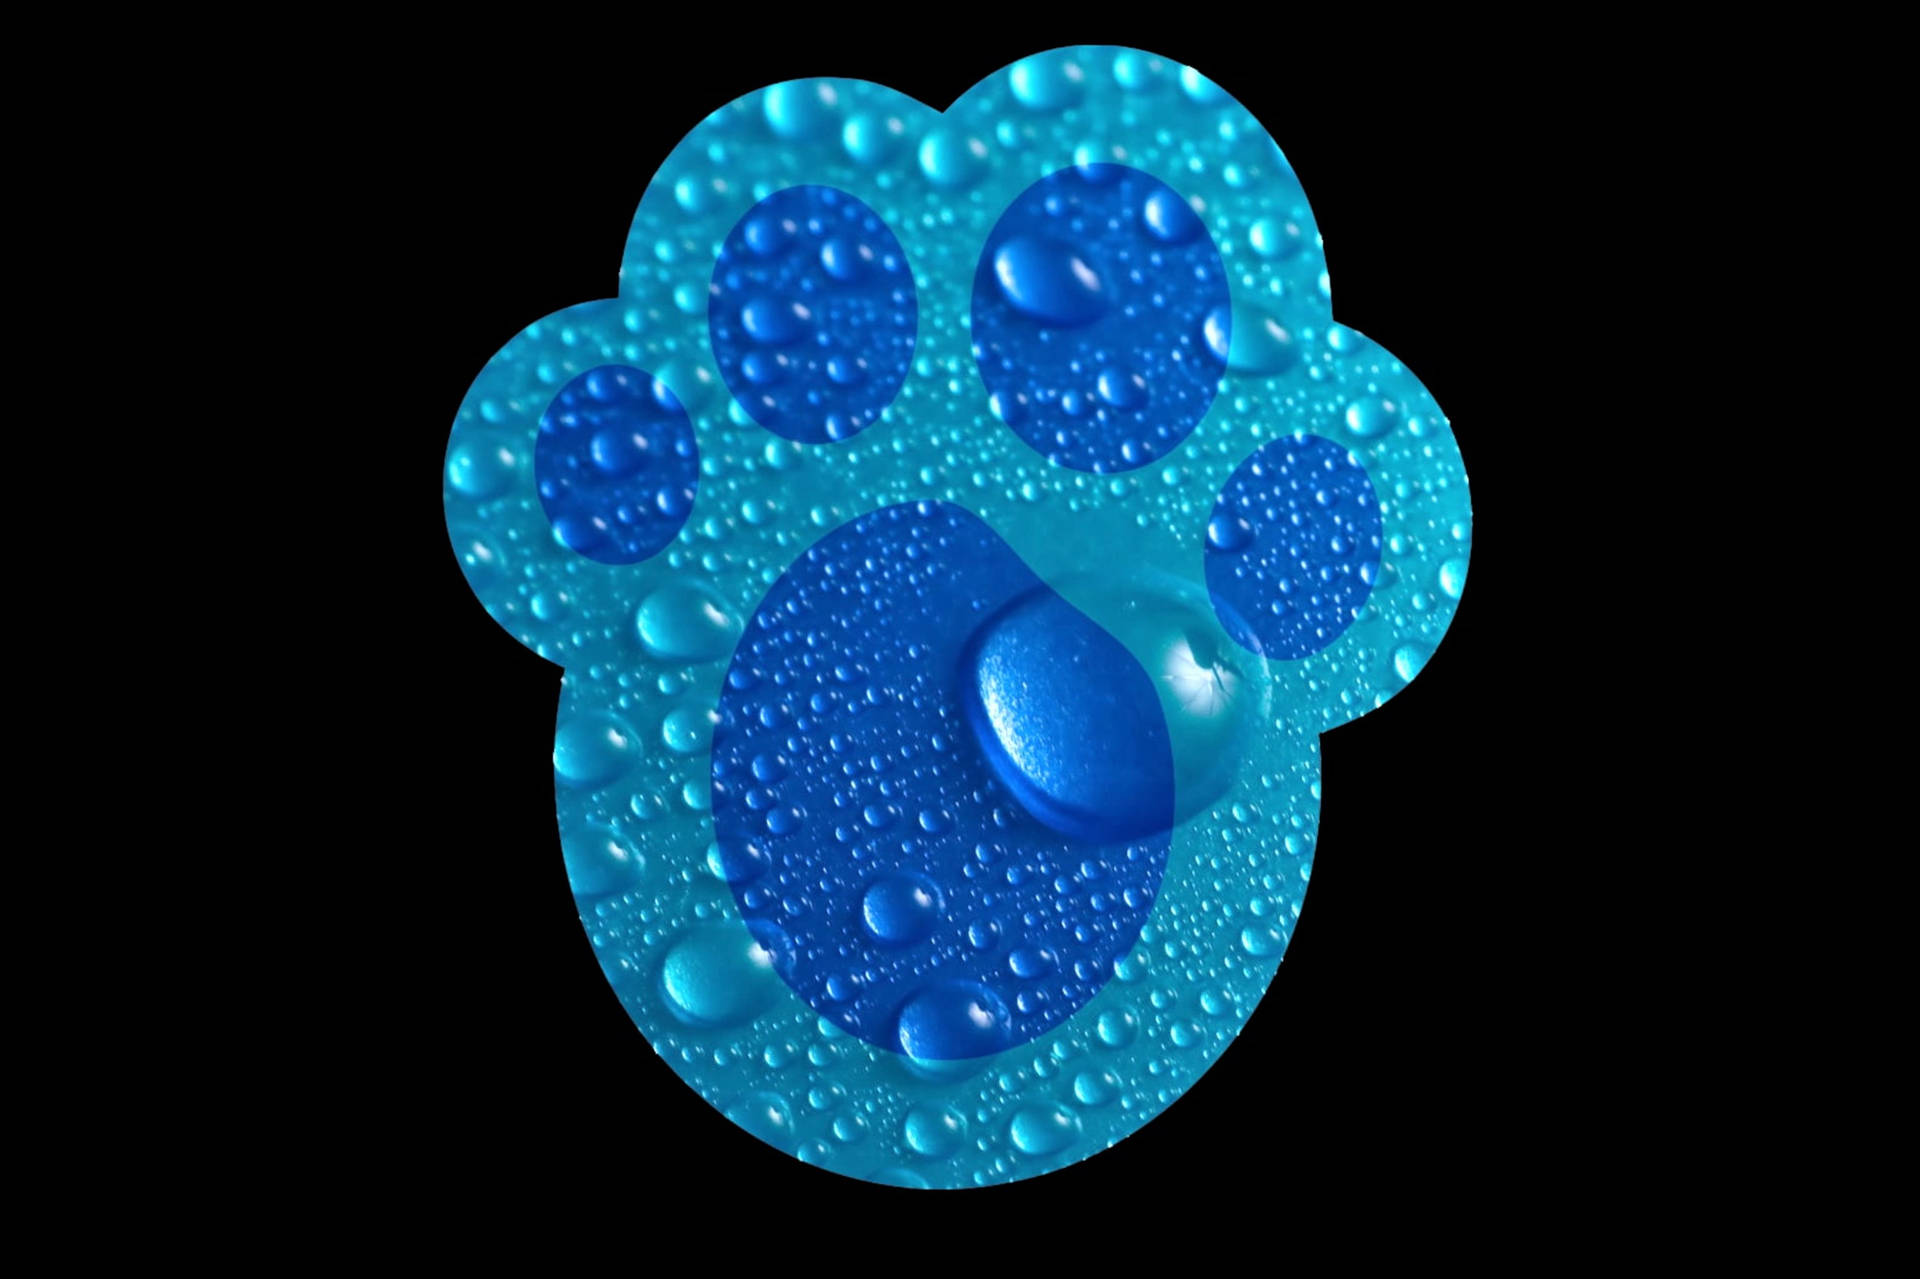 Blue Paw Print With Droplets Background